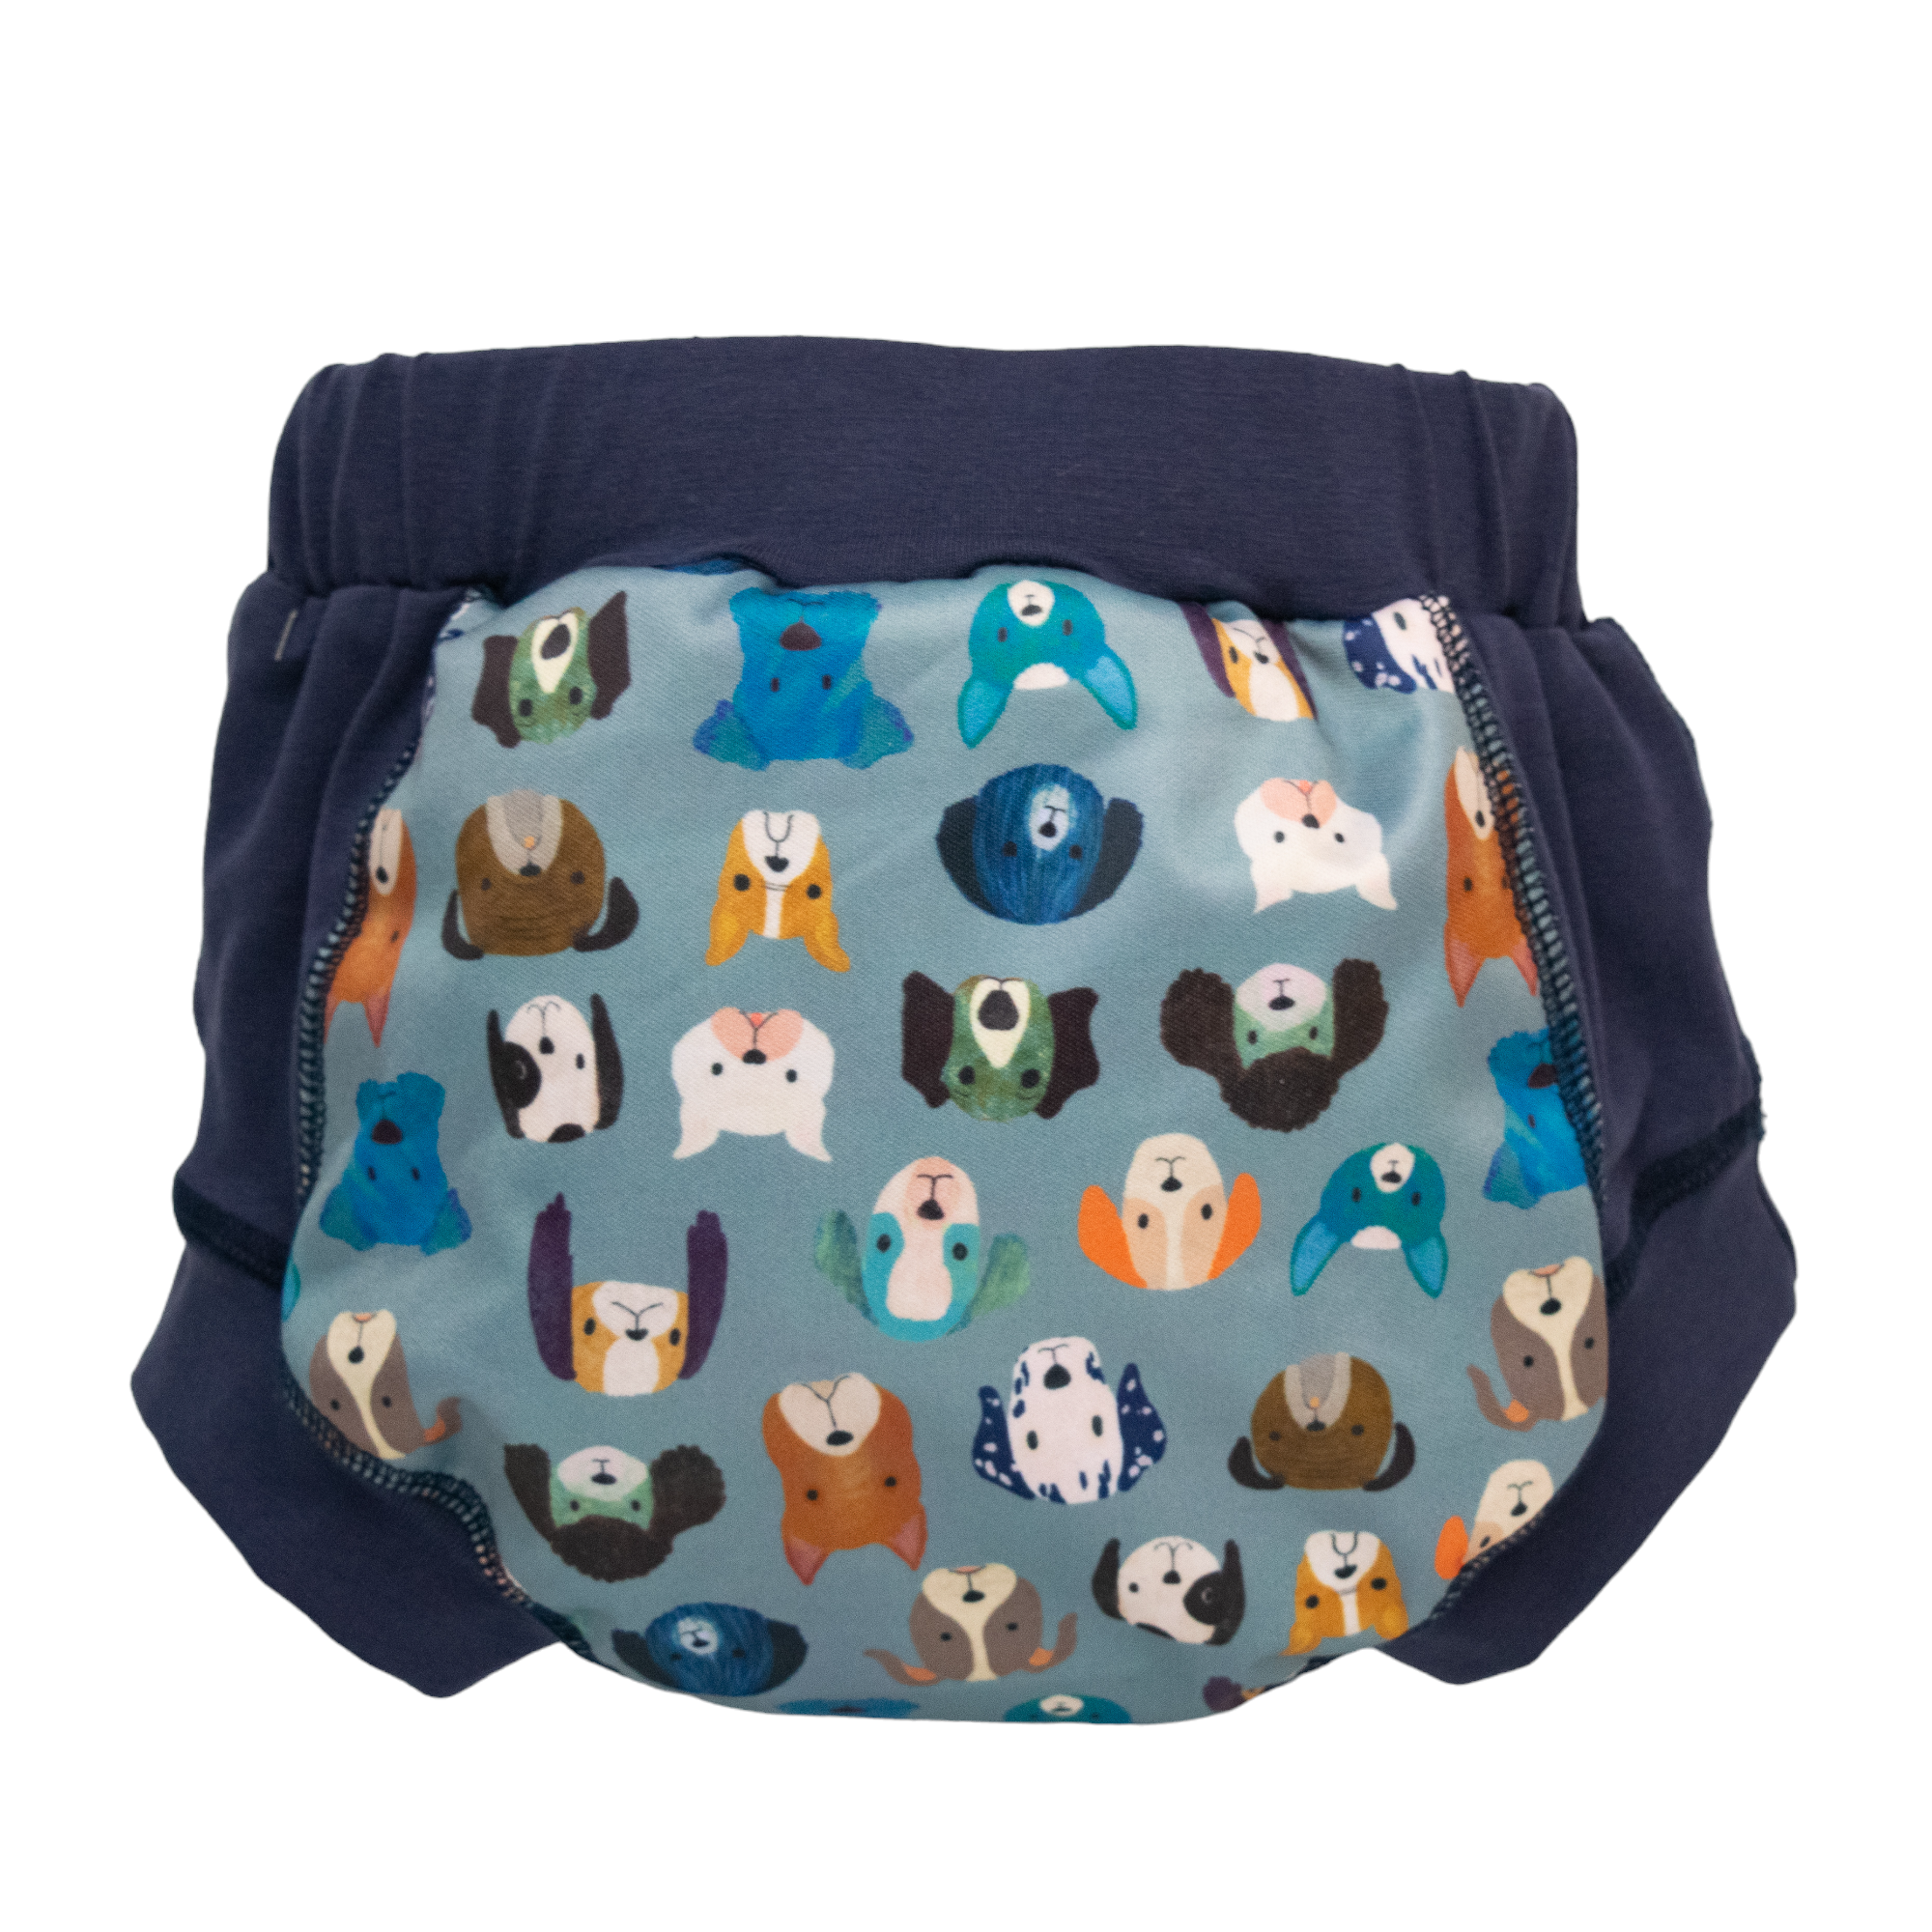 Wee Pants Training Undies - All the Dogs